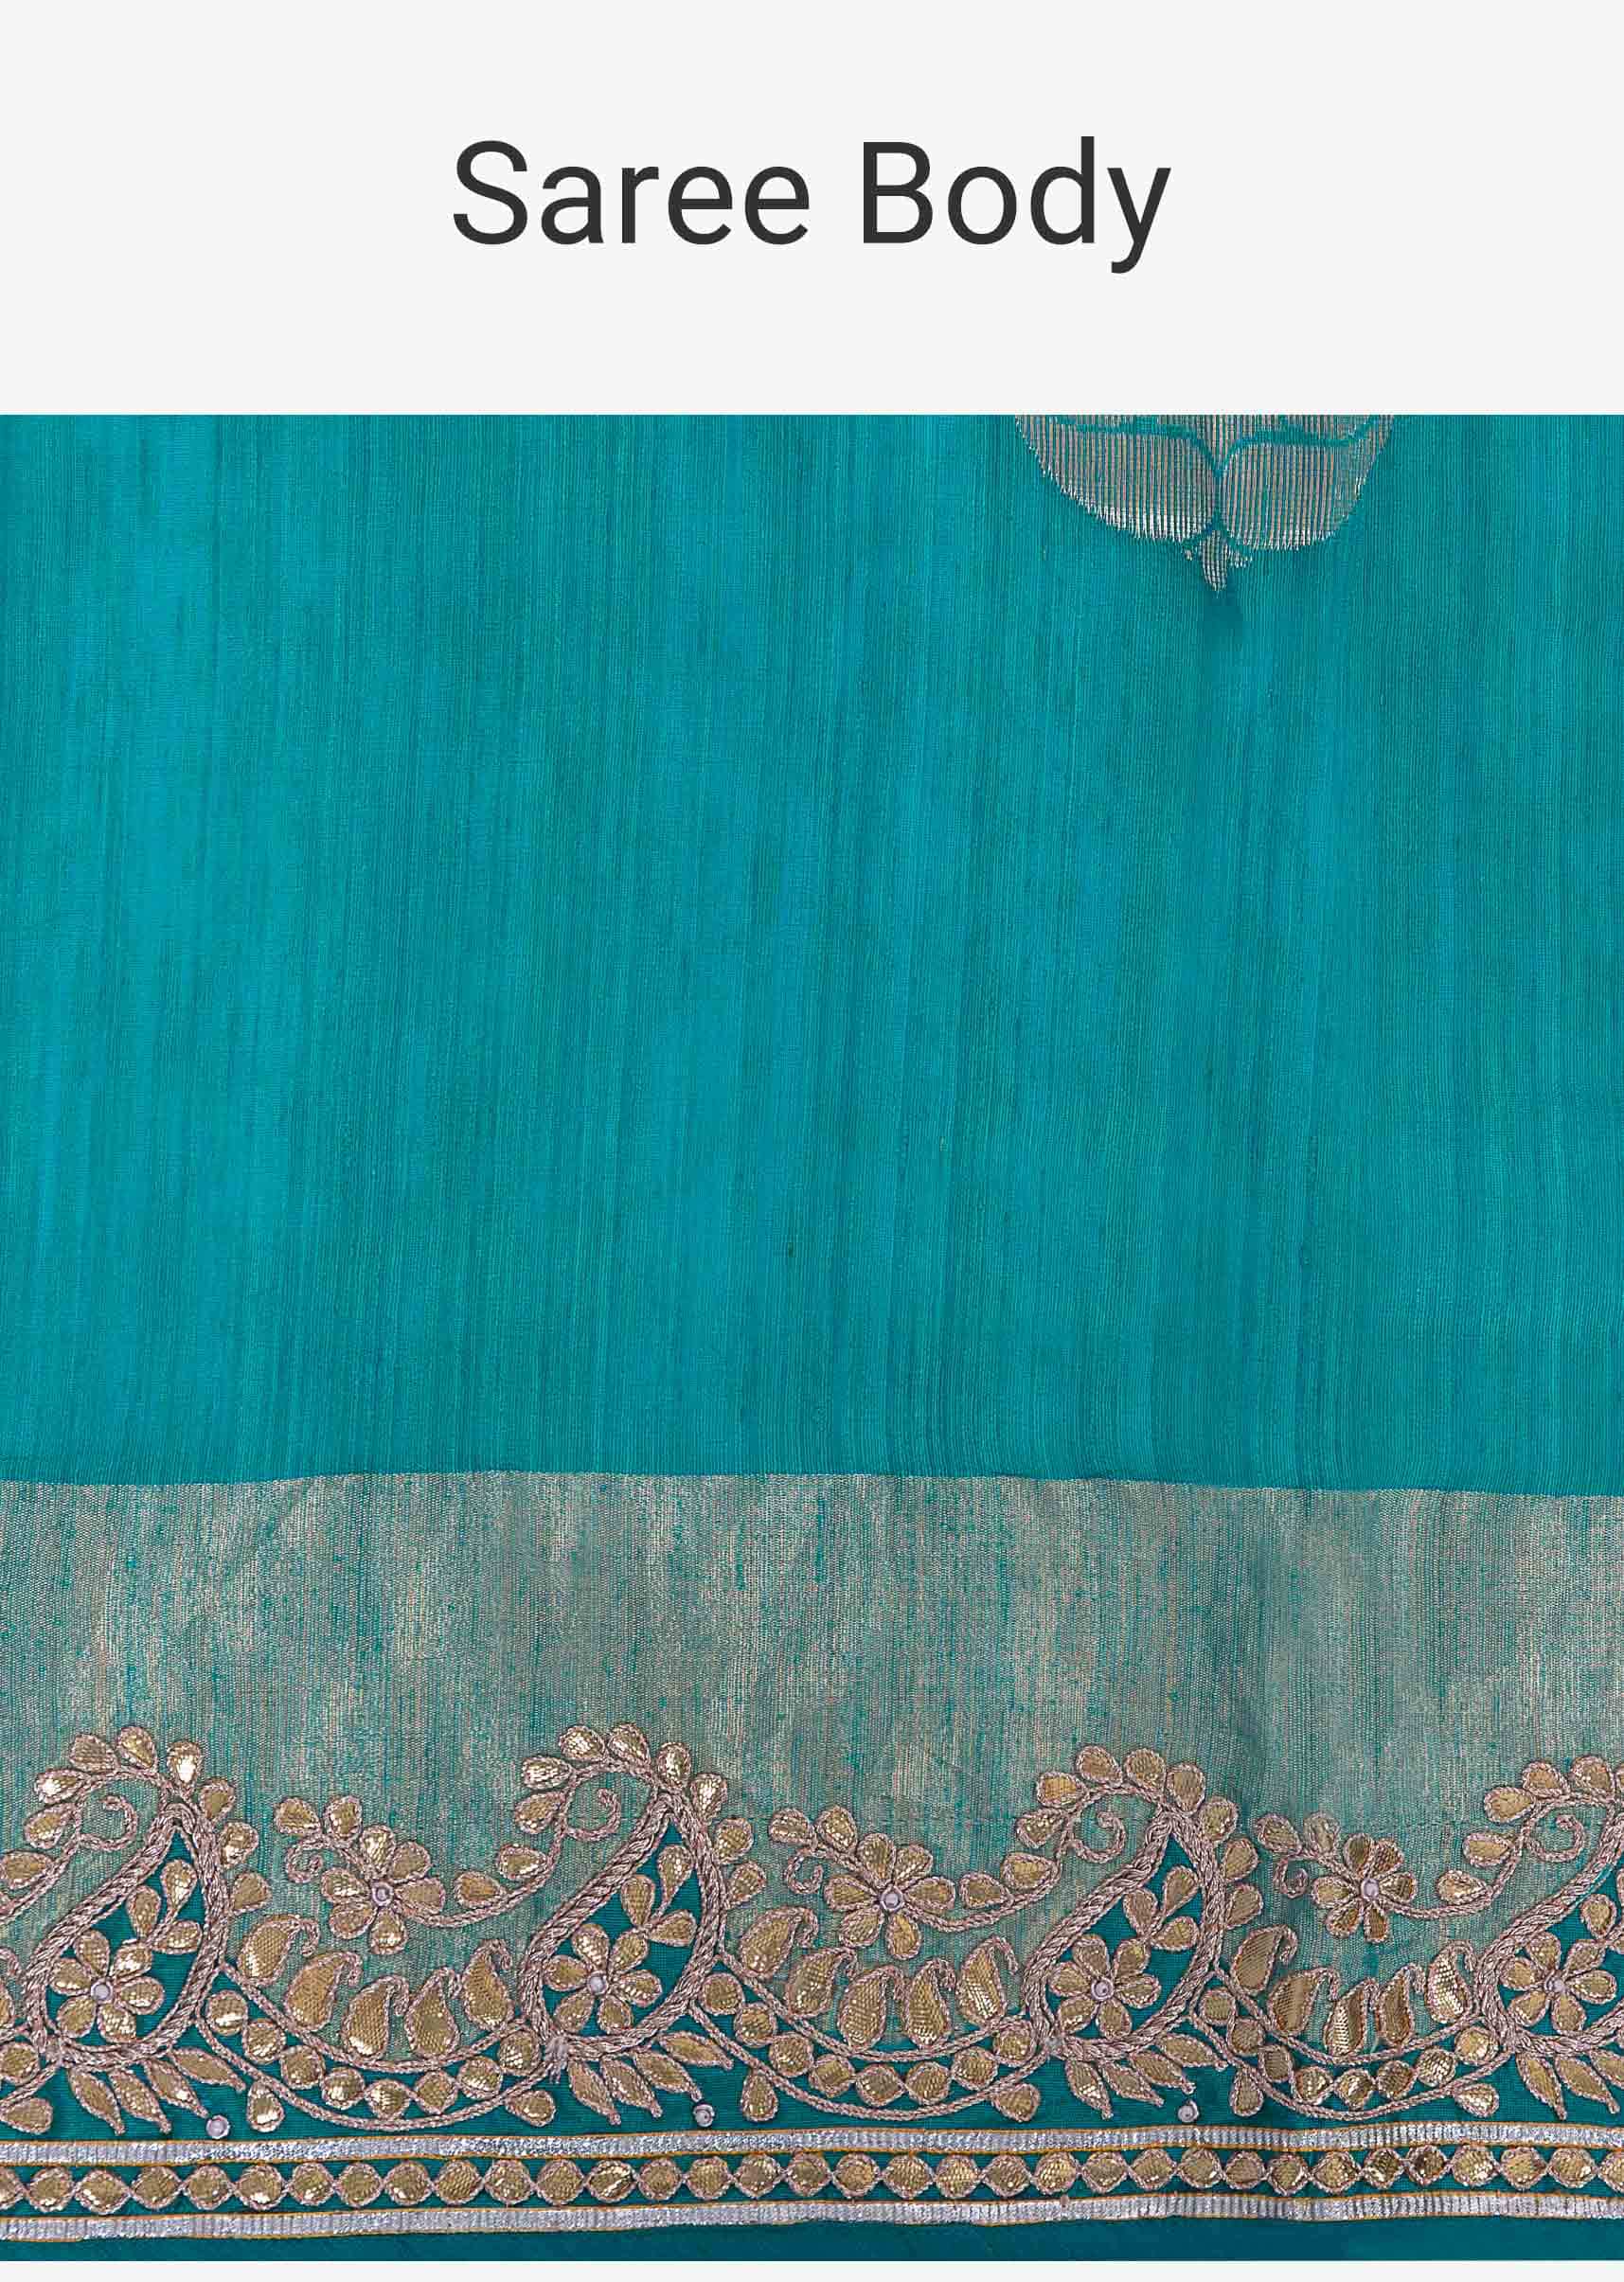 Green and blue shaded raw silk saree in weaved butti 